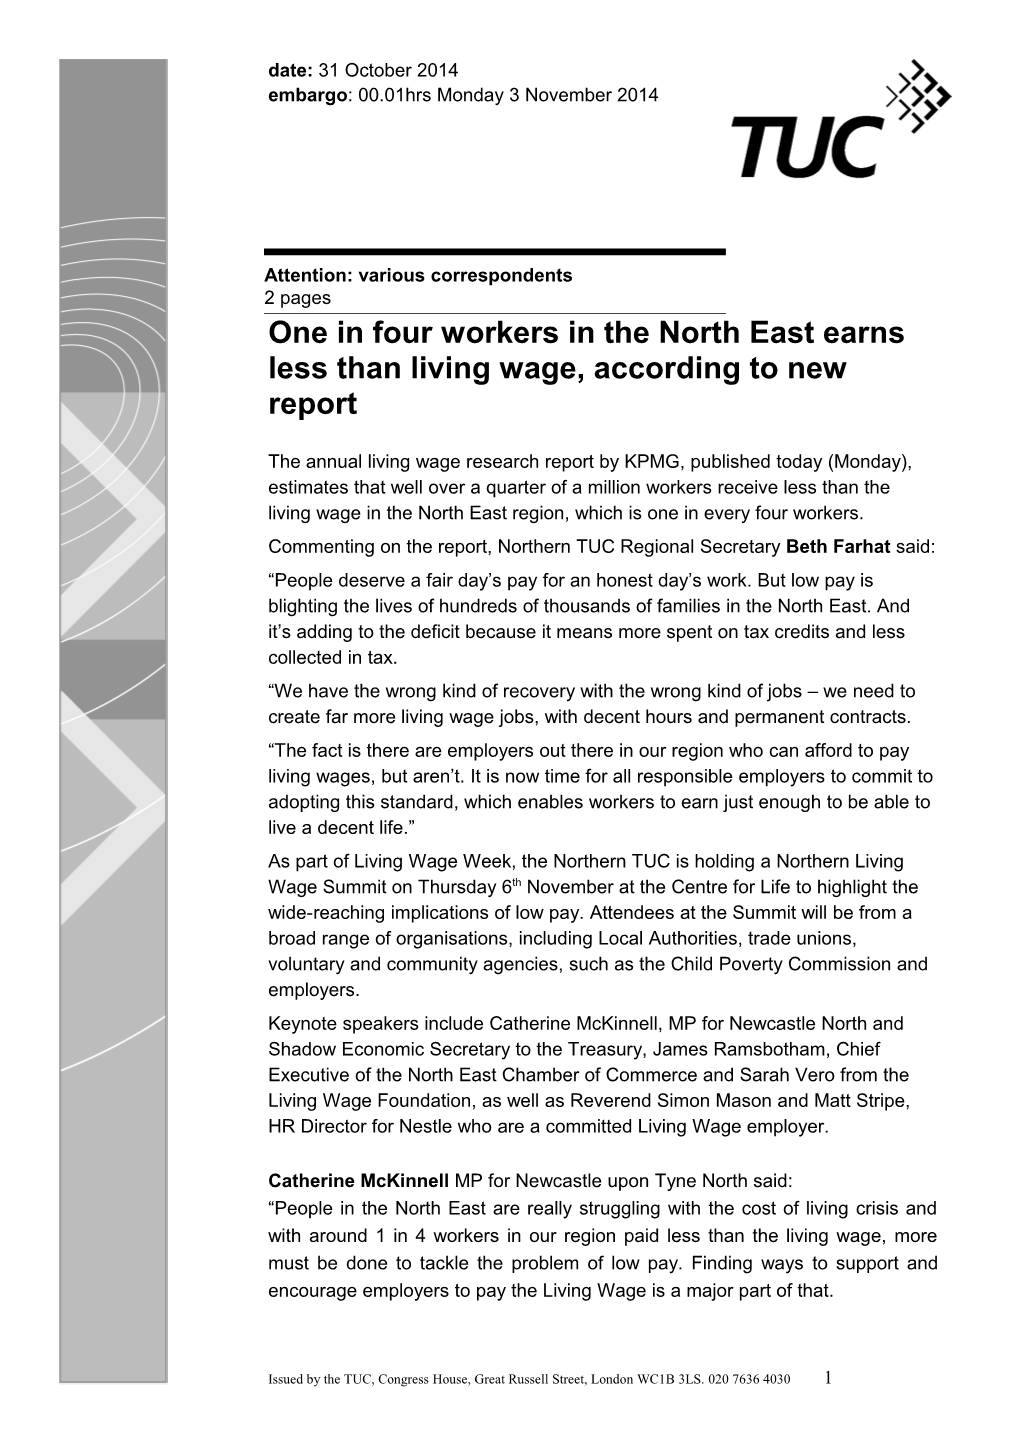 One in Four Workers Inthe North East Earns Less Than Living Wage, According to New Report